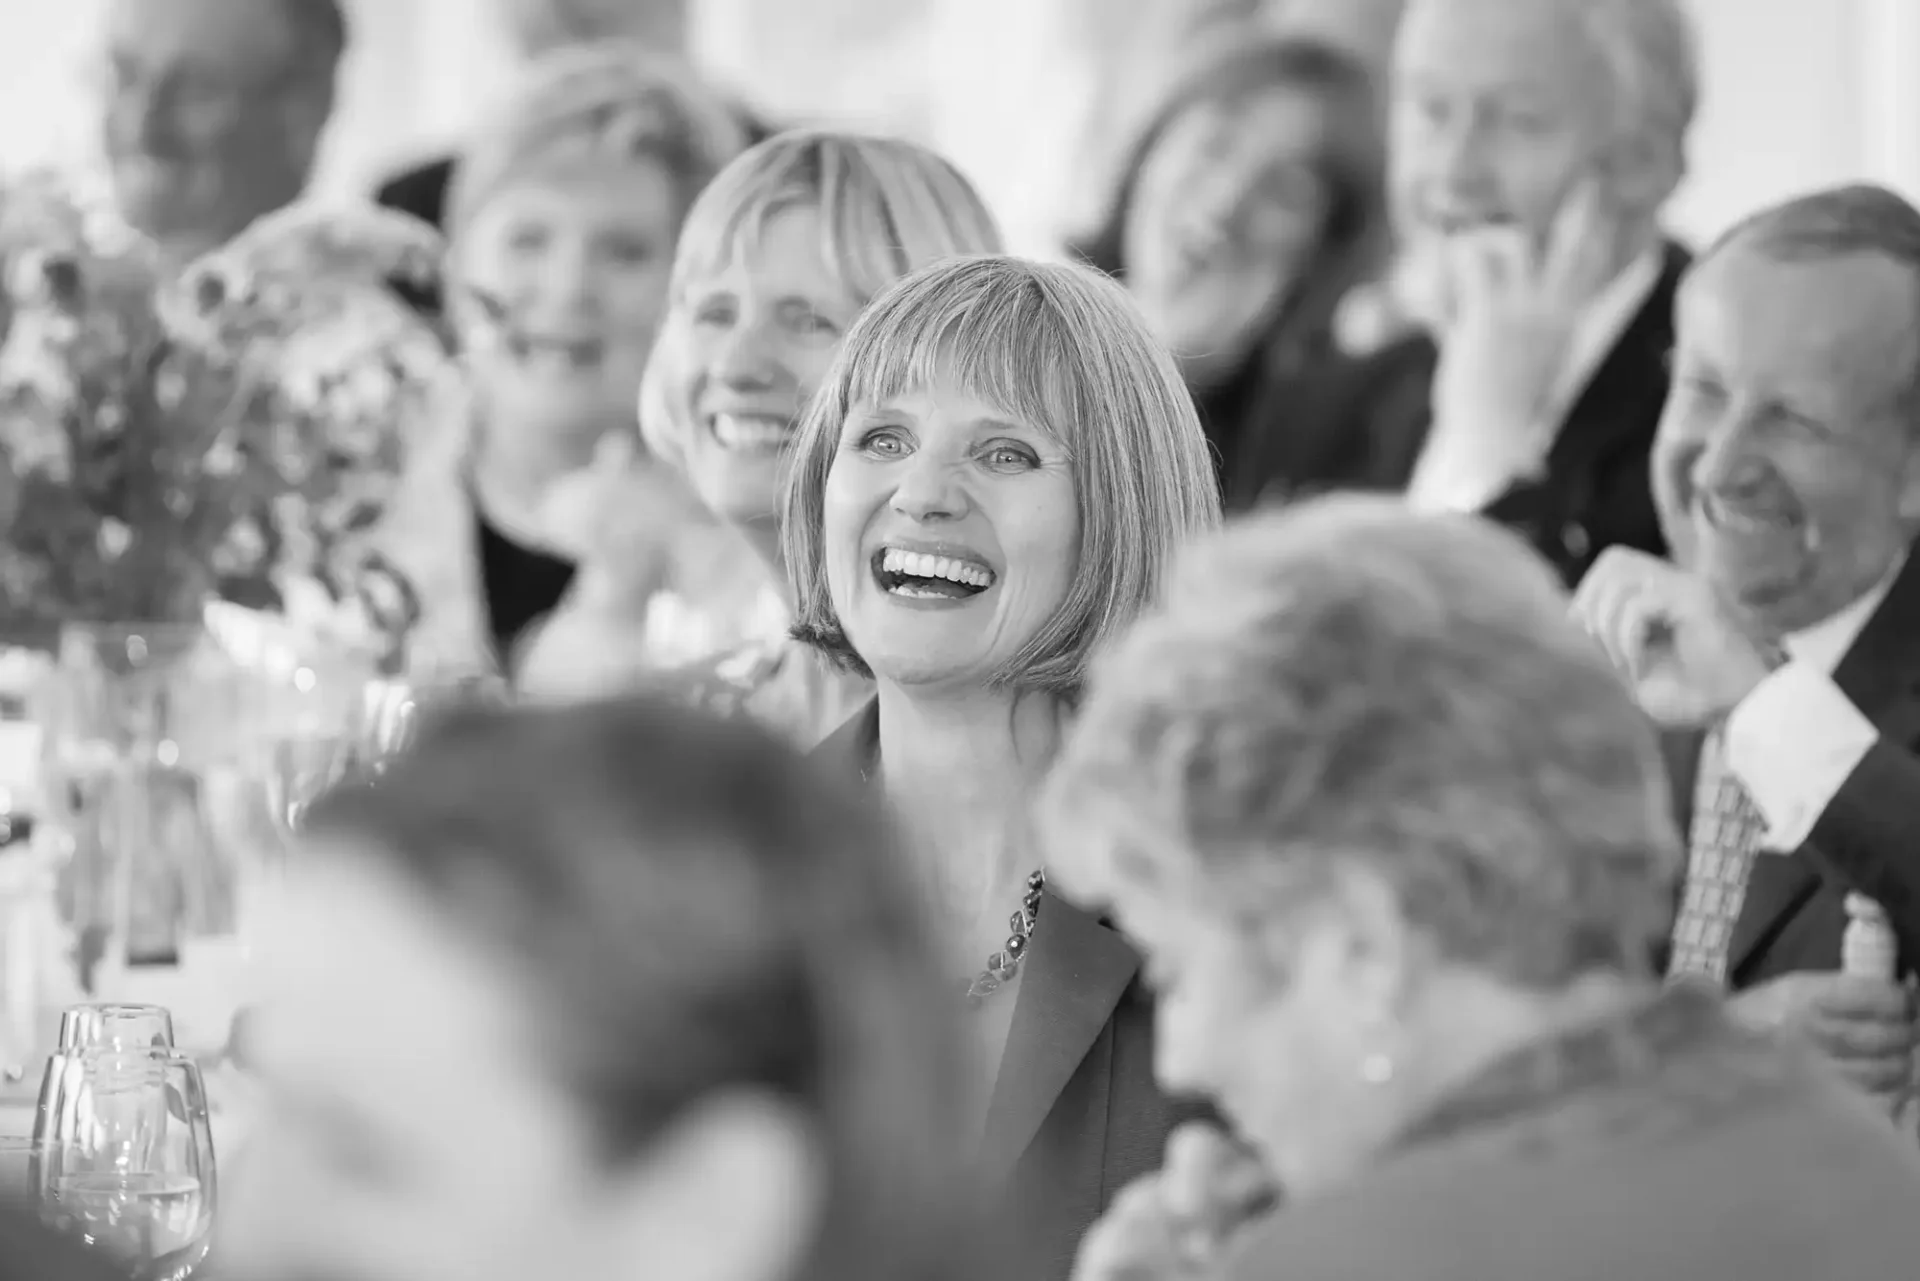 A black and white photo of a smiling woman with bobbed hair at a lively dinner event, surrounded by cheerful guests.